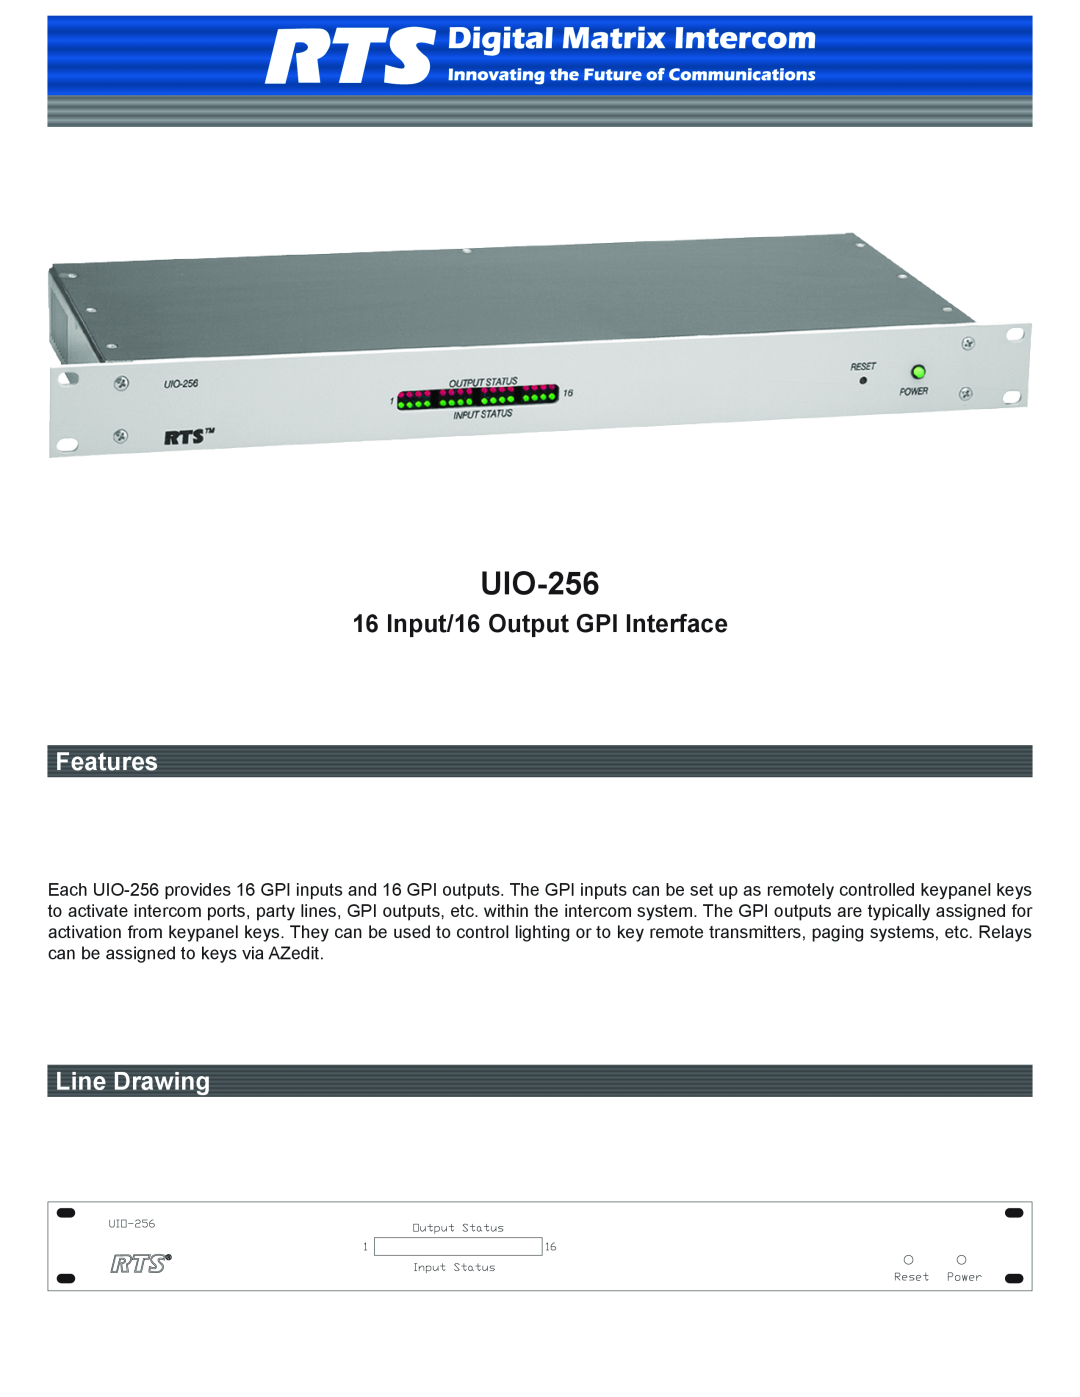 RTS UIO-256 manual Input/16 Output GPI Interface, Features, Line Drawing 